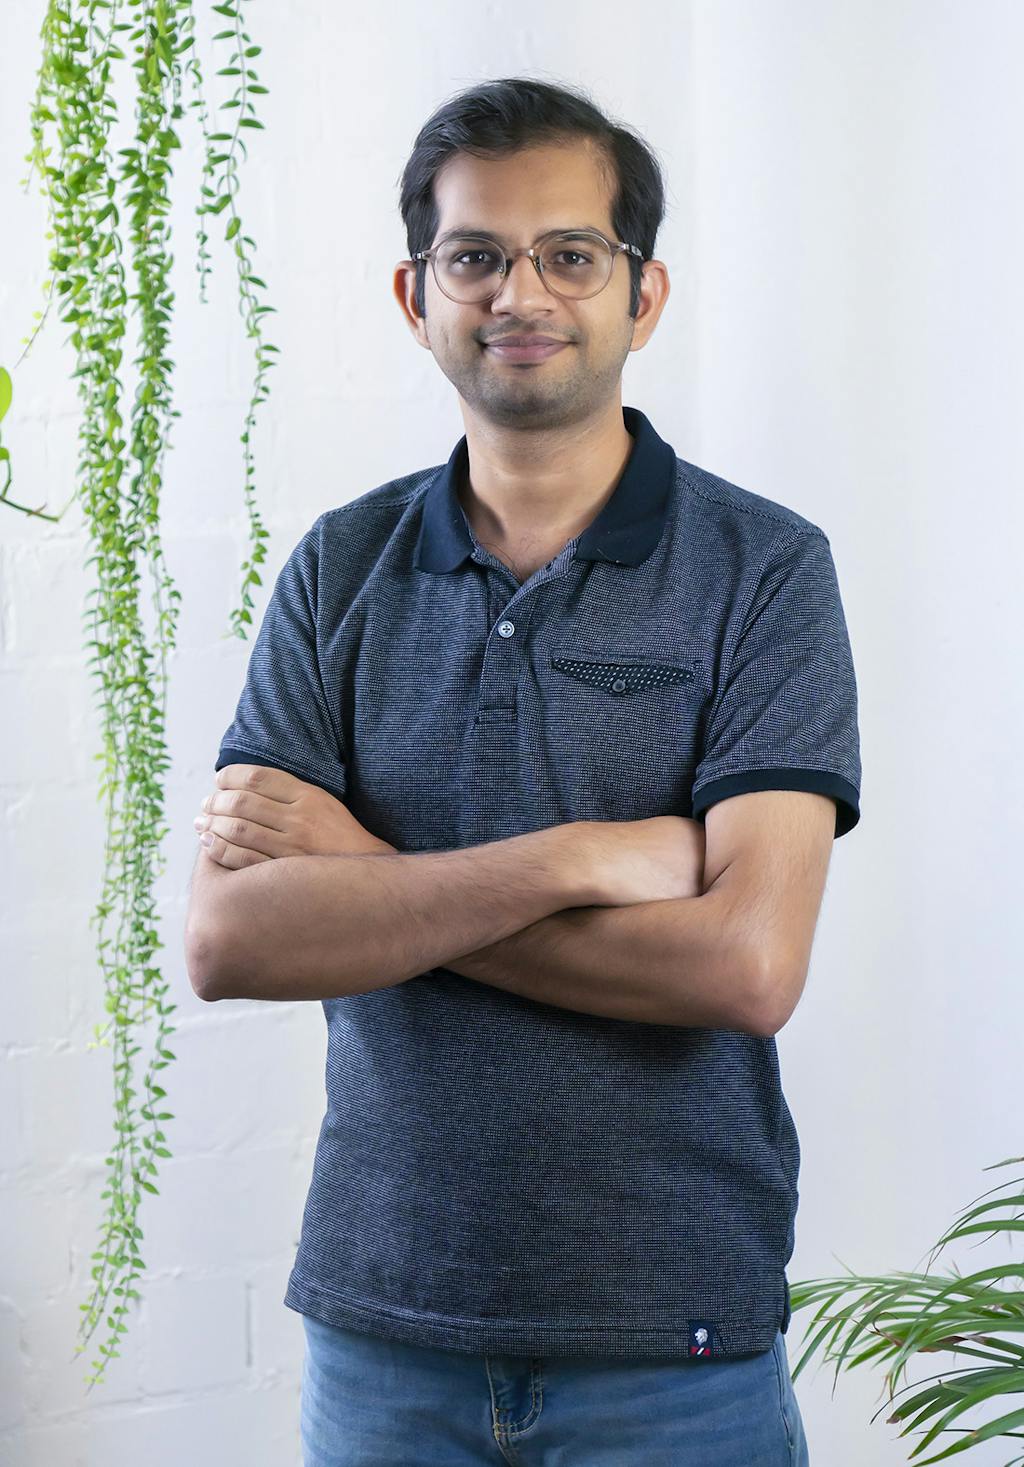 Shubham Verma | Product Manager at Medbelle